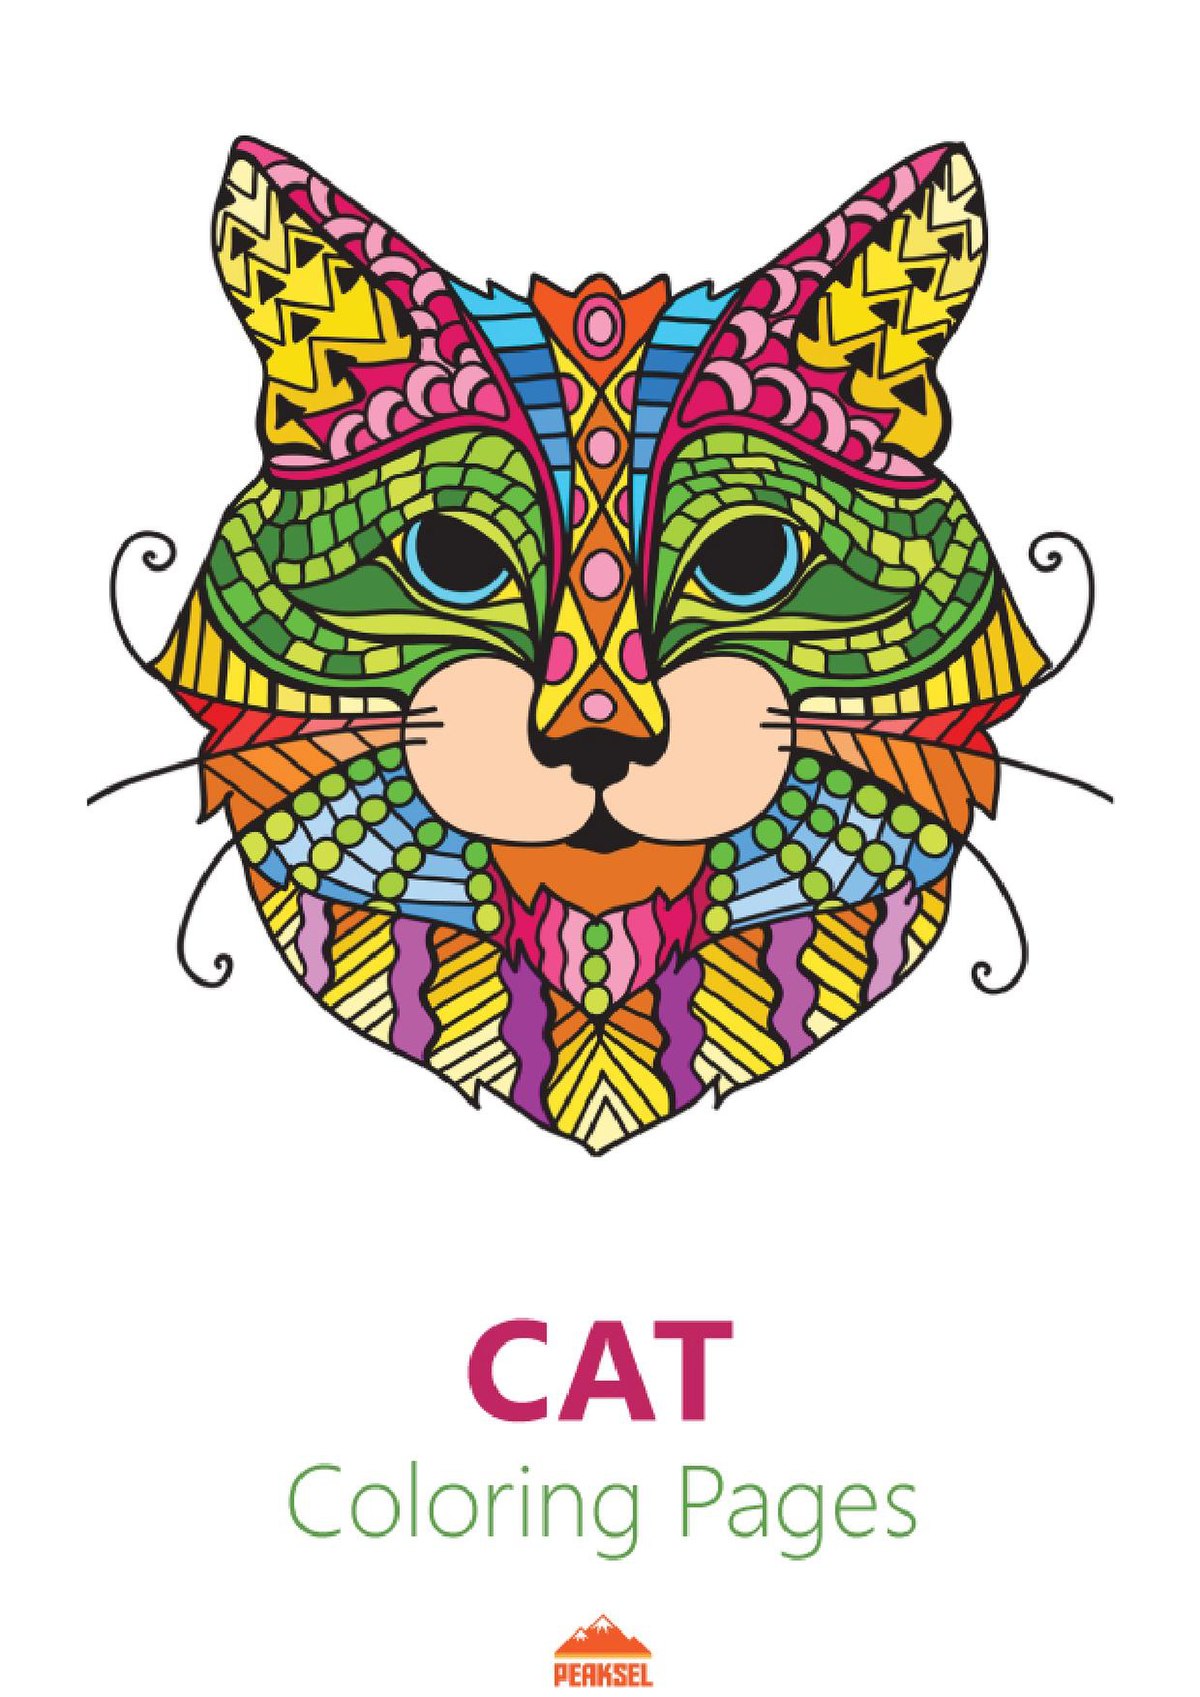 Download File:Cat Coloring Pages For Adults - Printable Coloring ...